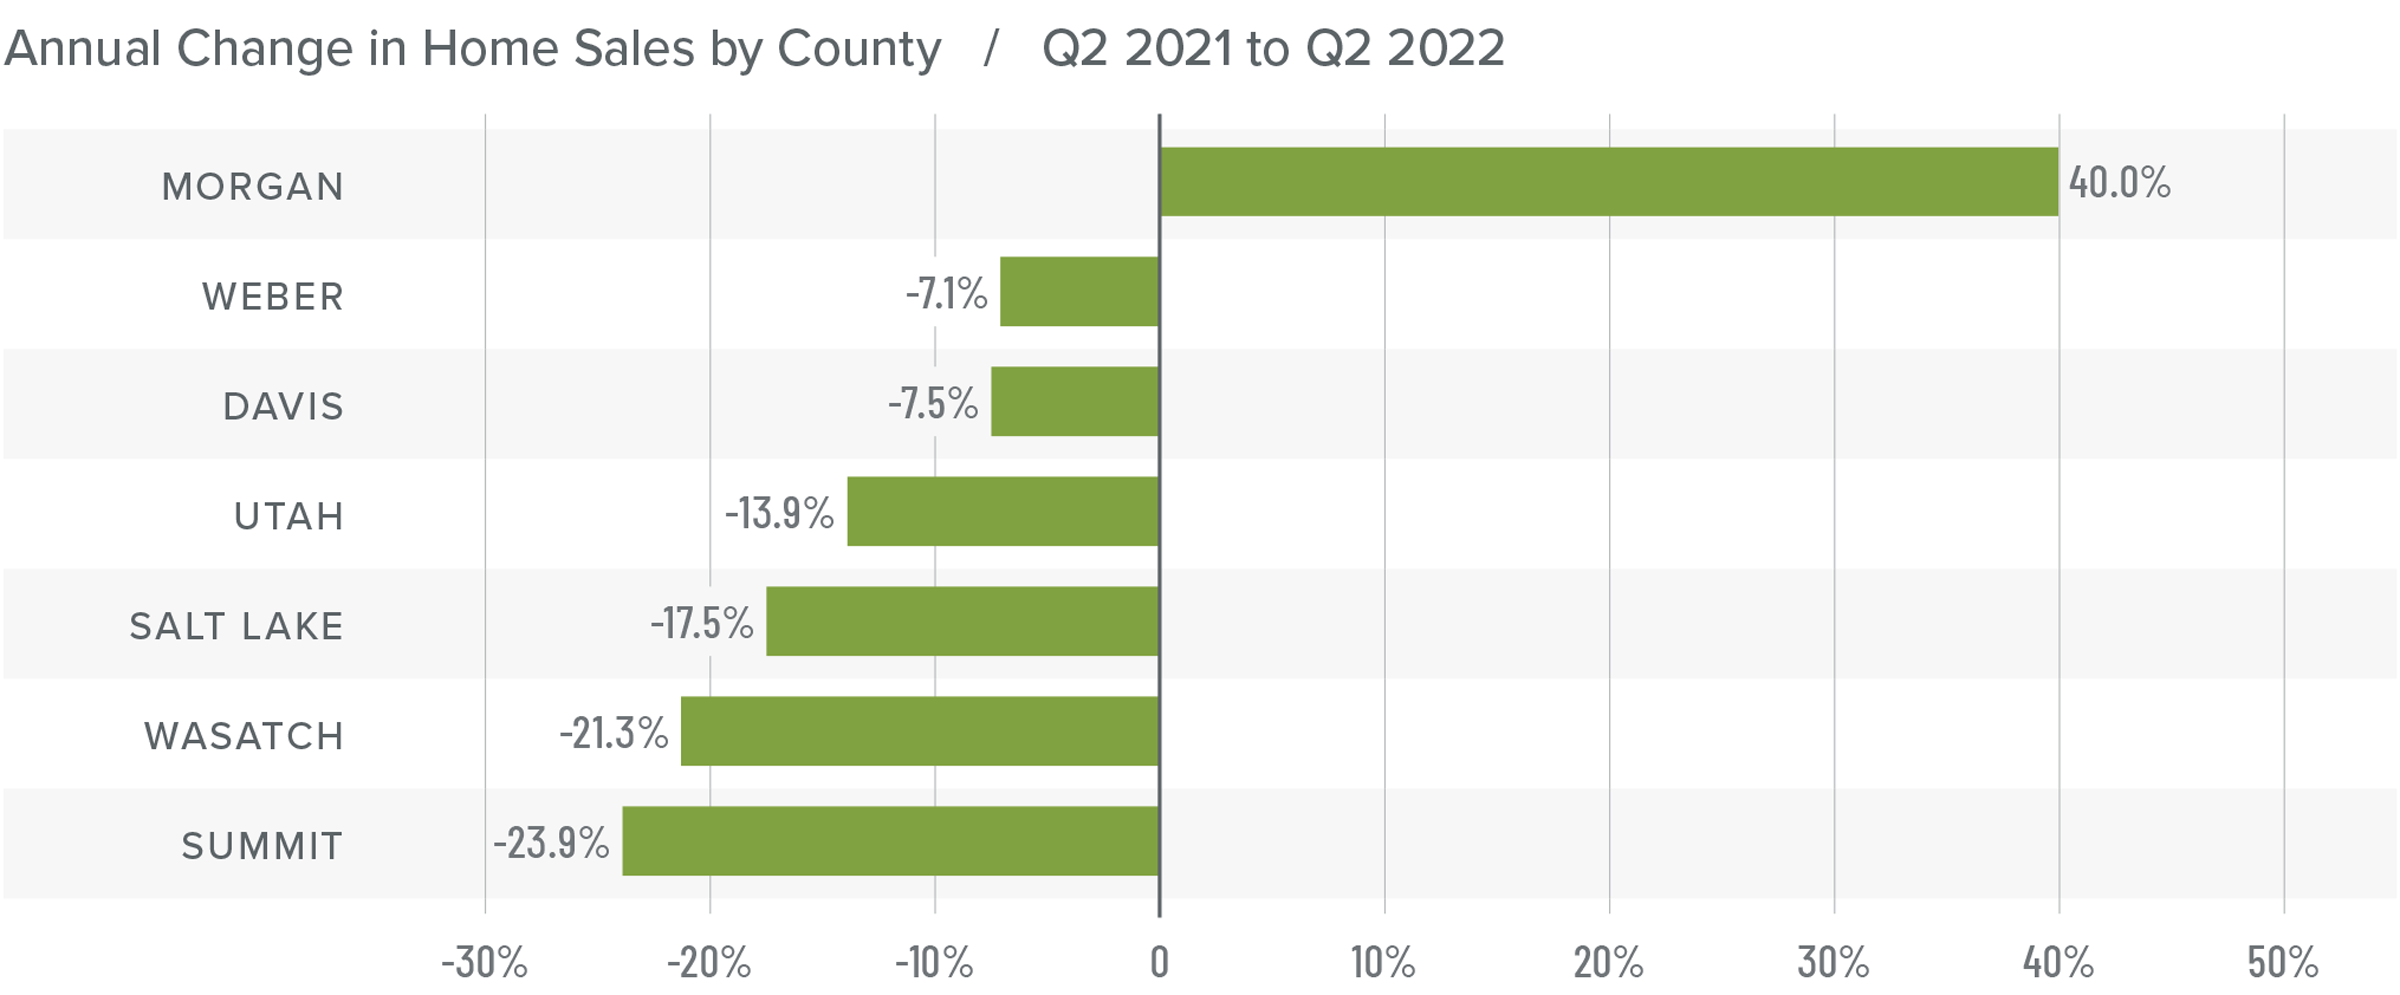 A bar graph showing the annual change in home sales for various counties in Utah from Q2 2021 to Q2 2022. All counties listed showed a negative year-over-year percentage change, except for Morgan County, which showed a positive 40% change. Weber County had a -7.1% change, followed by Davis at -7.5%, Utah at -13.9%, Salt Lake at -17.5%, Wasatch at -21.3%, and Summit at -23.9%.